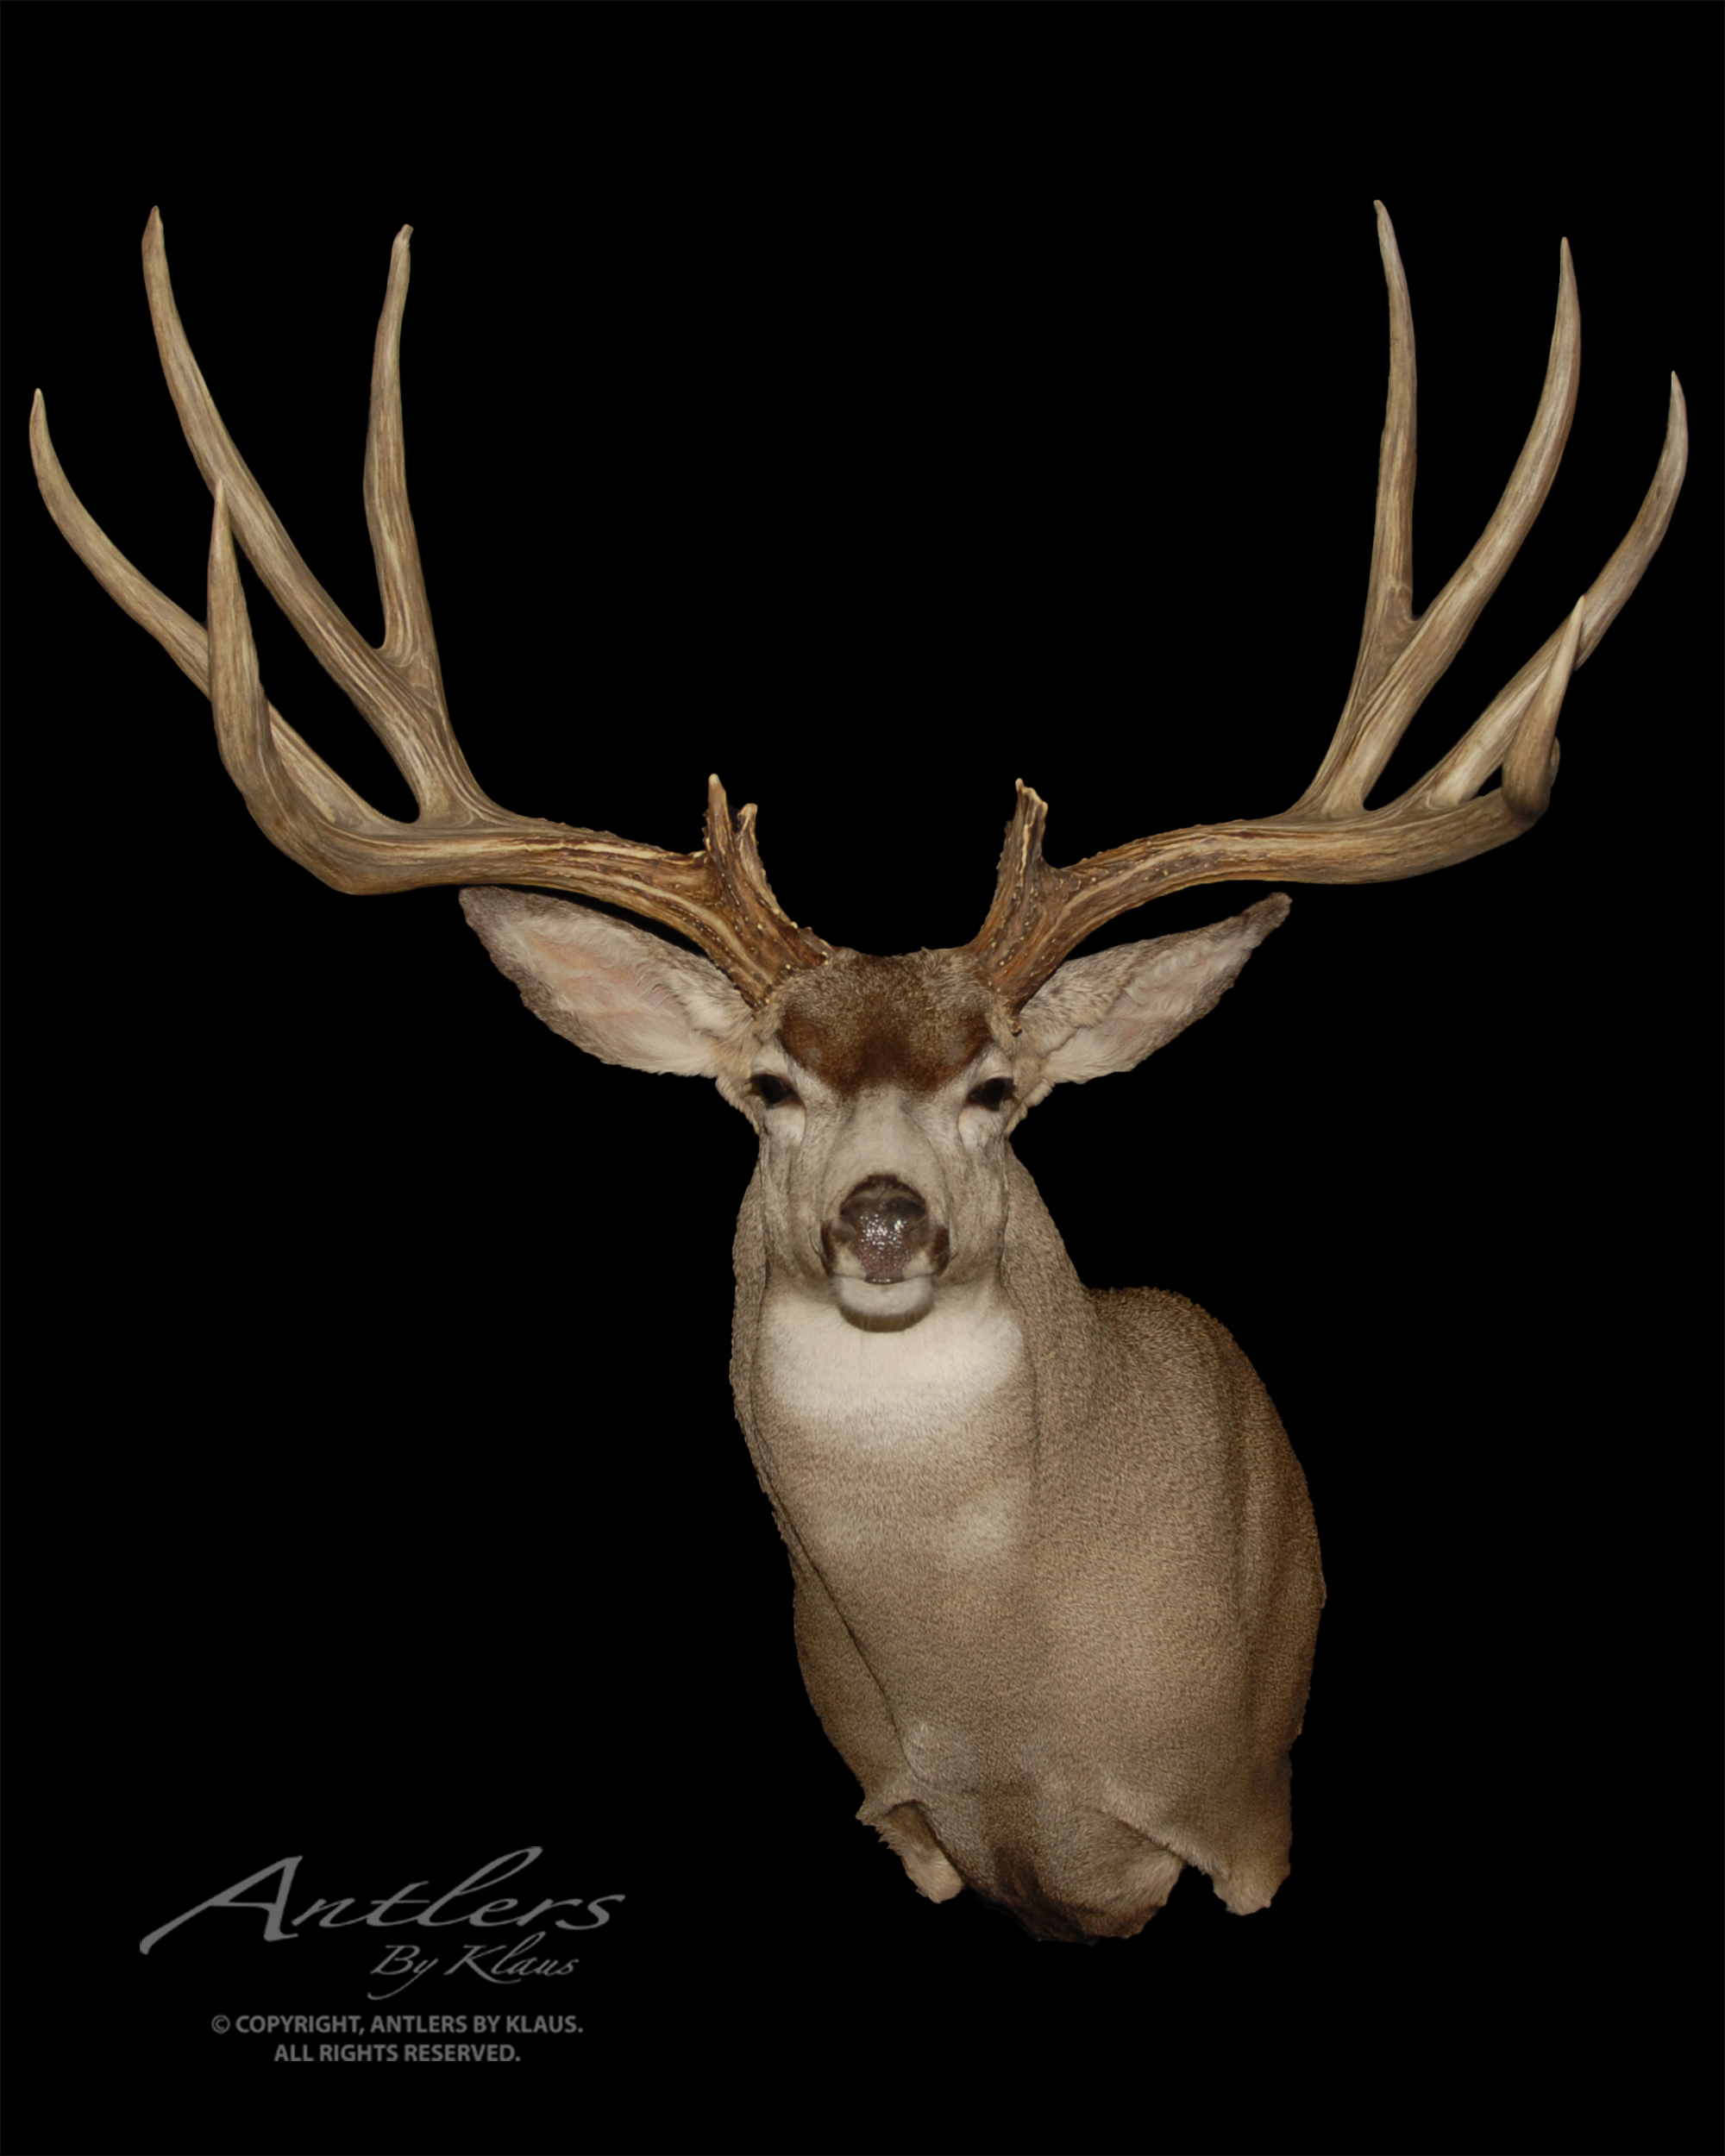 Largest Mule Deer In The World